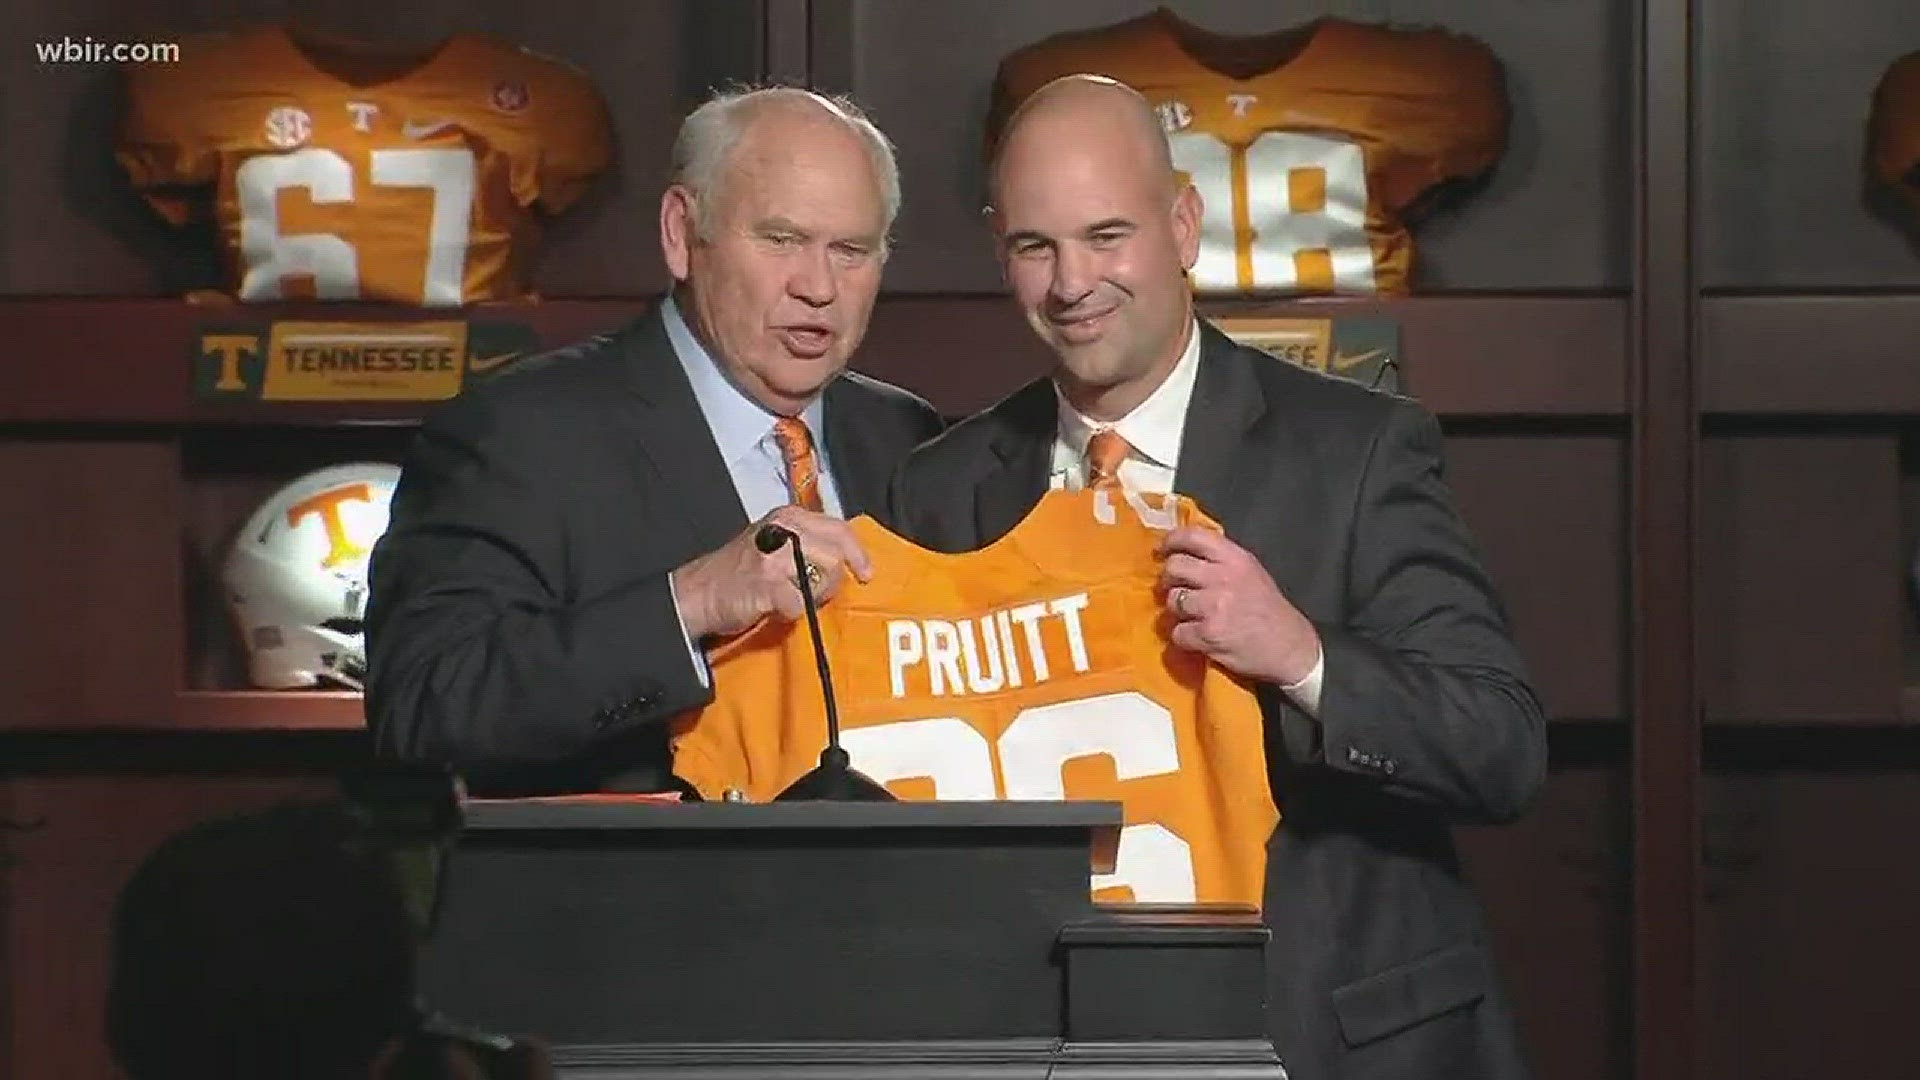 Dec. 7, 2017: Chancellor Beverly Davenport and Director of Athletics Phillip Fulmer introduce Jeremy Pruitt as UT's 26th head football coach.